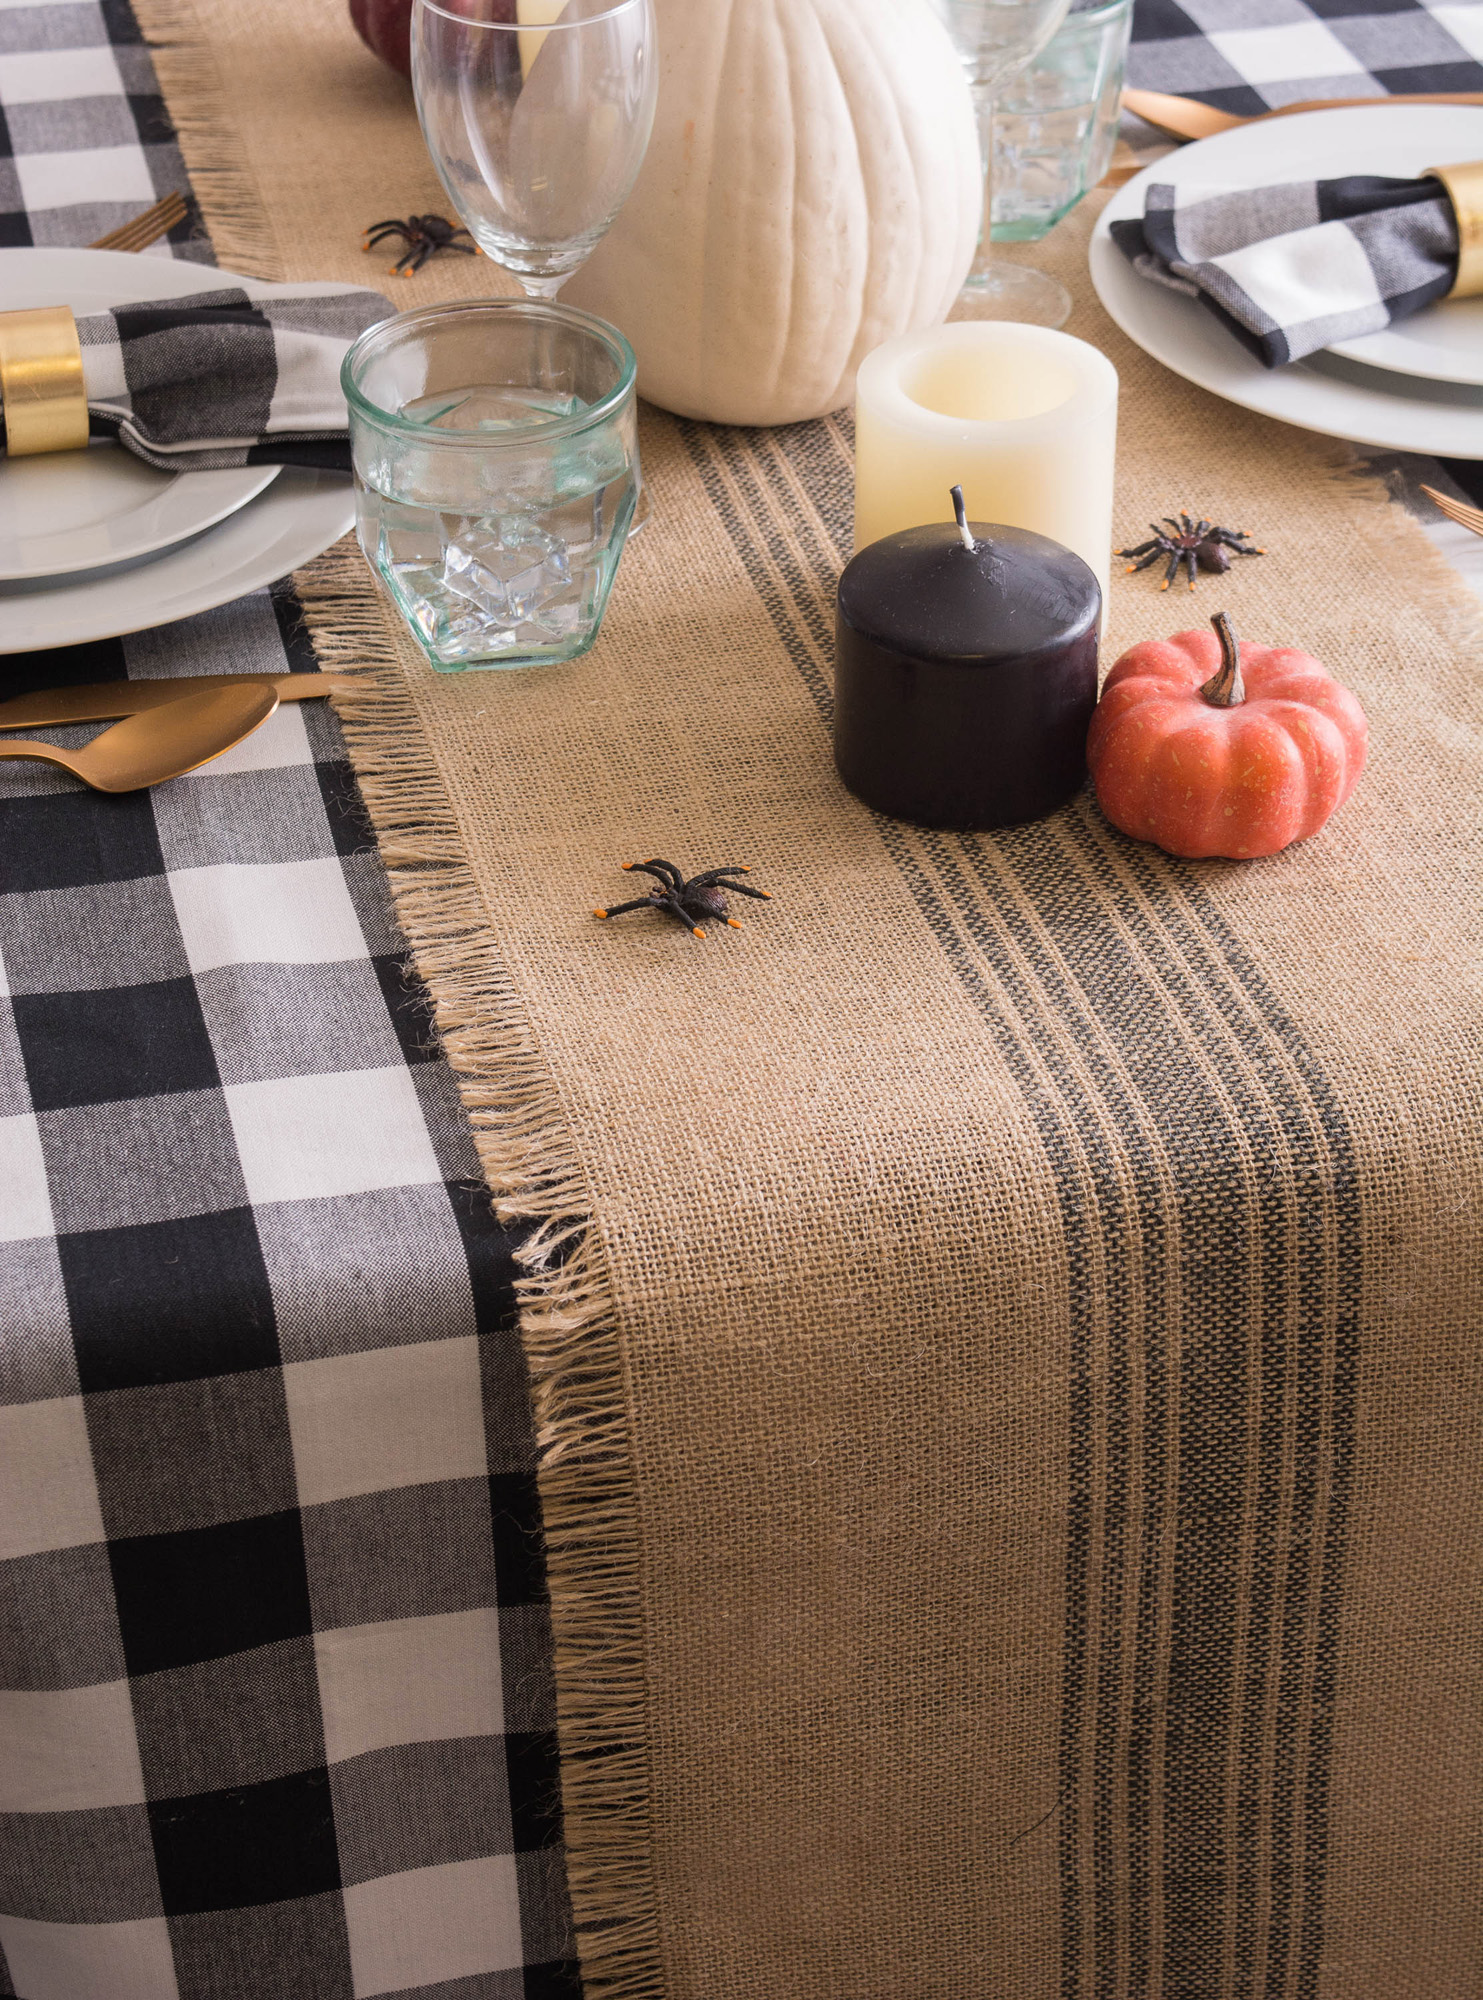 Contemporary Home Living 108" Beige and Black Striped Rectangular Table Runner